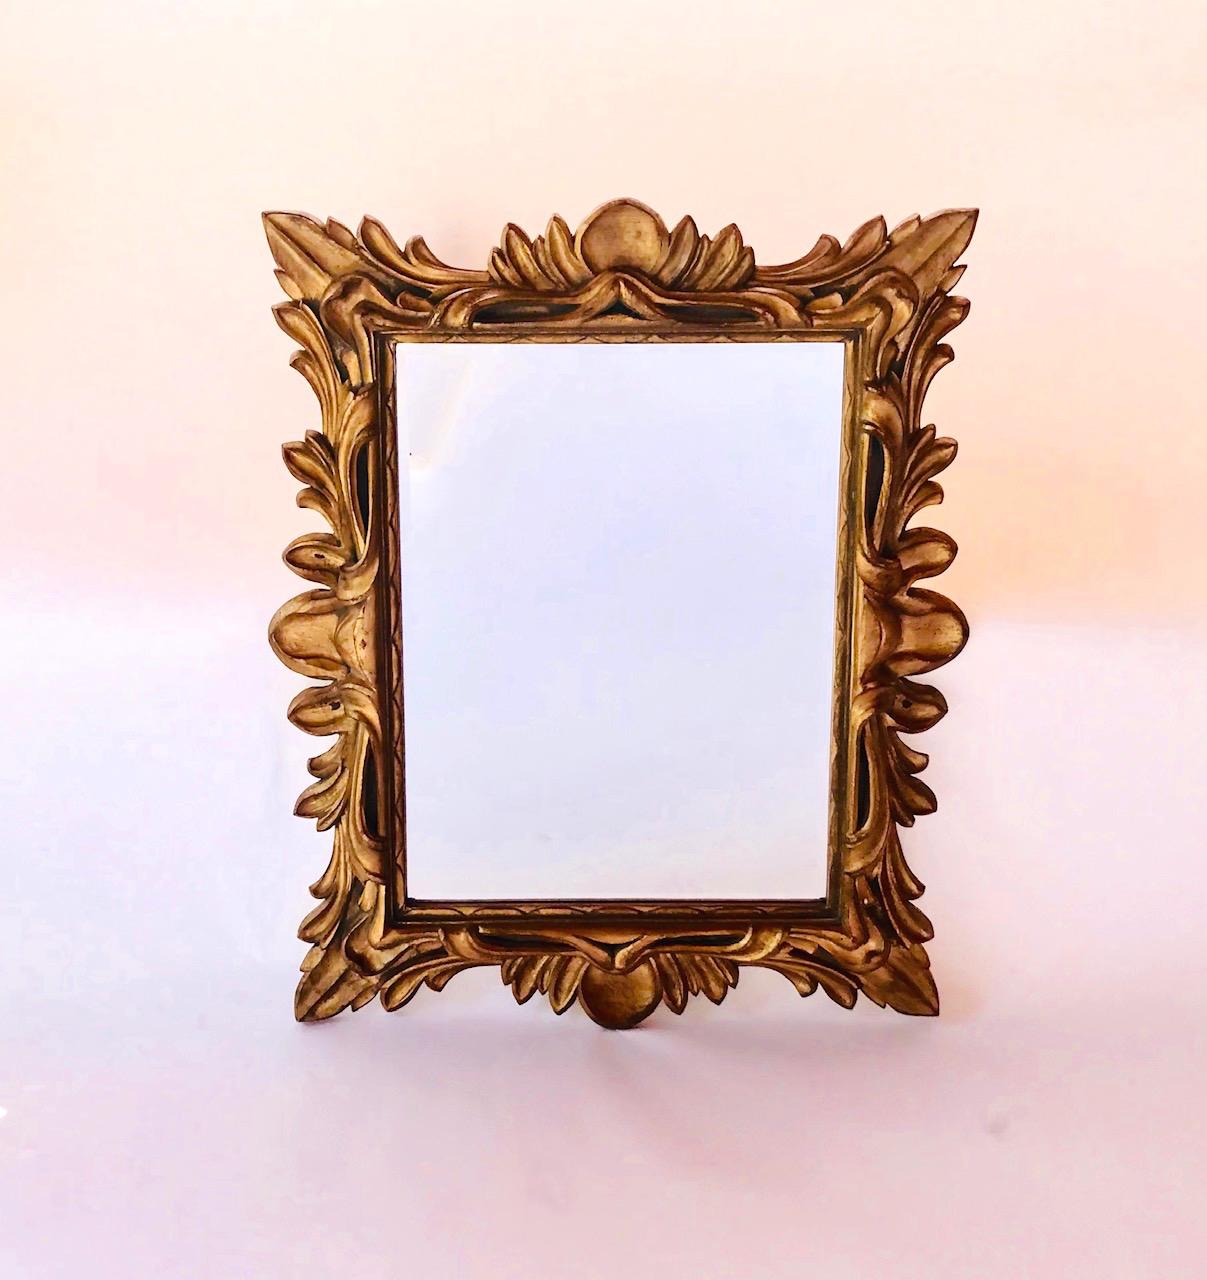 Hollywood Regency Baroque style large-scale mirror with spectacular ornate leaf frame. Antiqued gold leaf finish over molded resin frame with scrolled designs. Inner frame features scalloped carved wood and large hand-bevelled glass mirror.